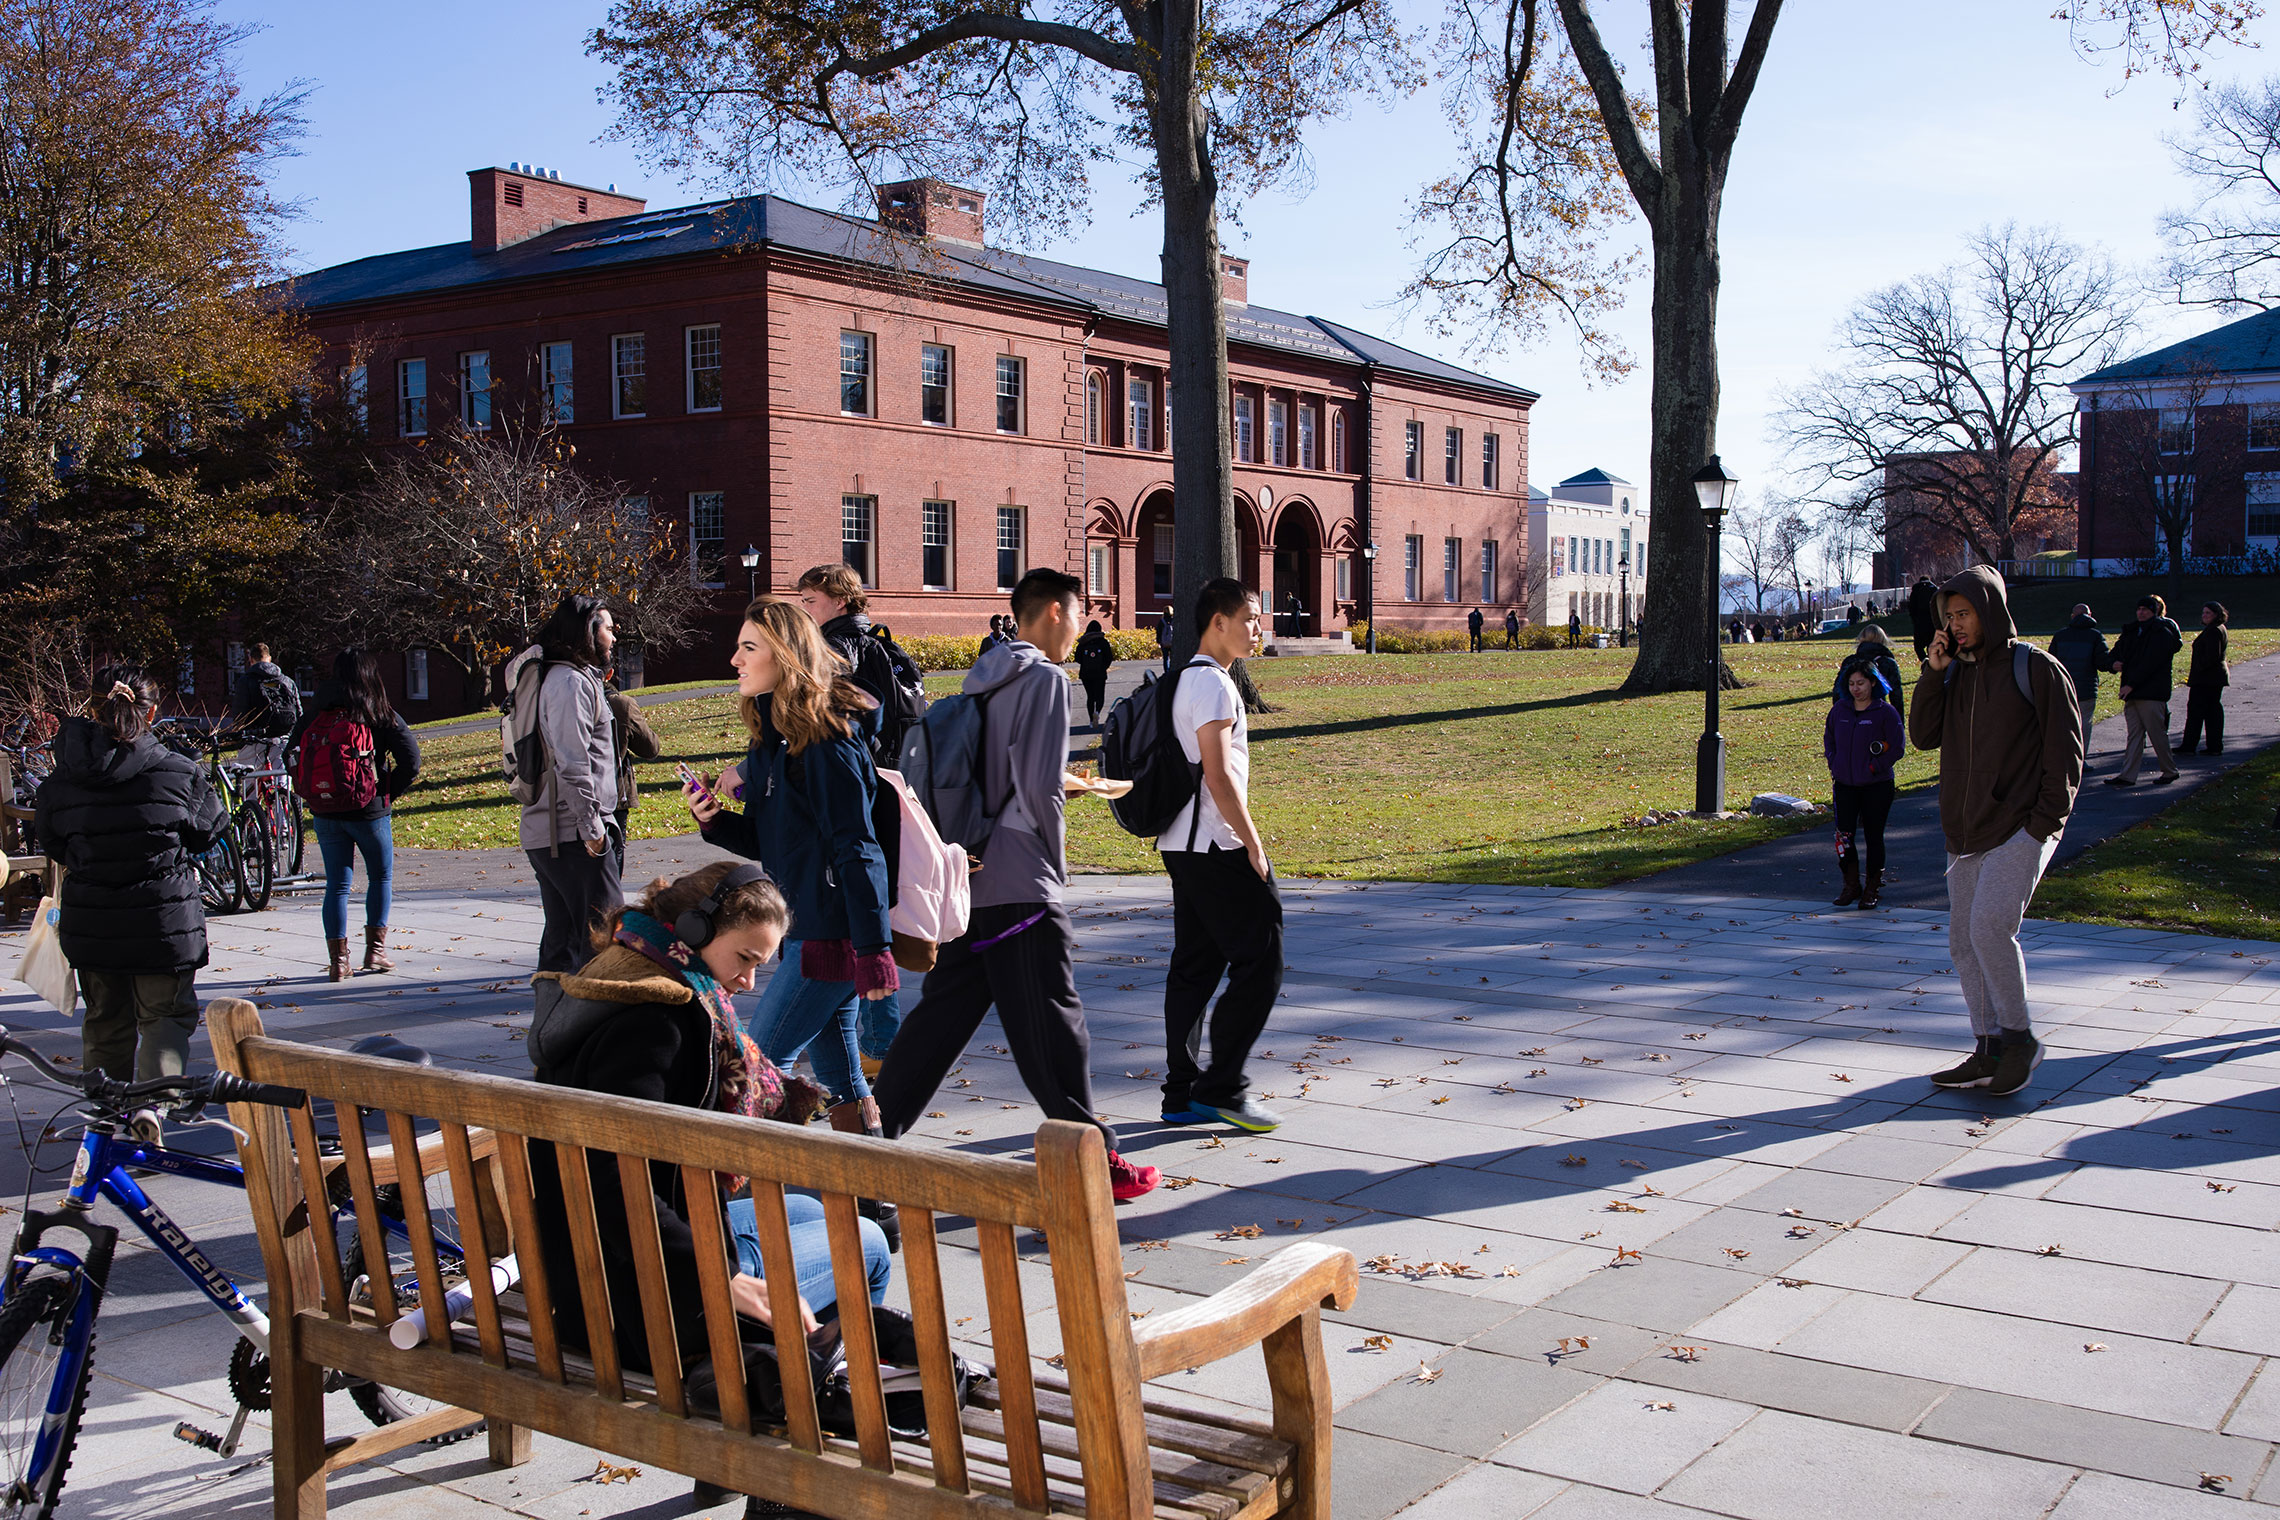 Students walking to classes on a sunny day in early fall at Amherst College.